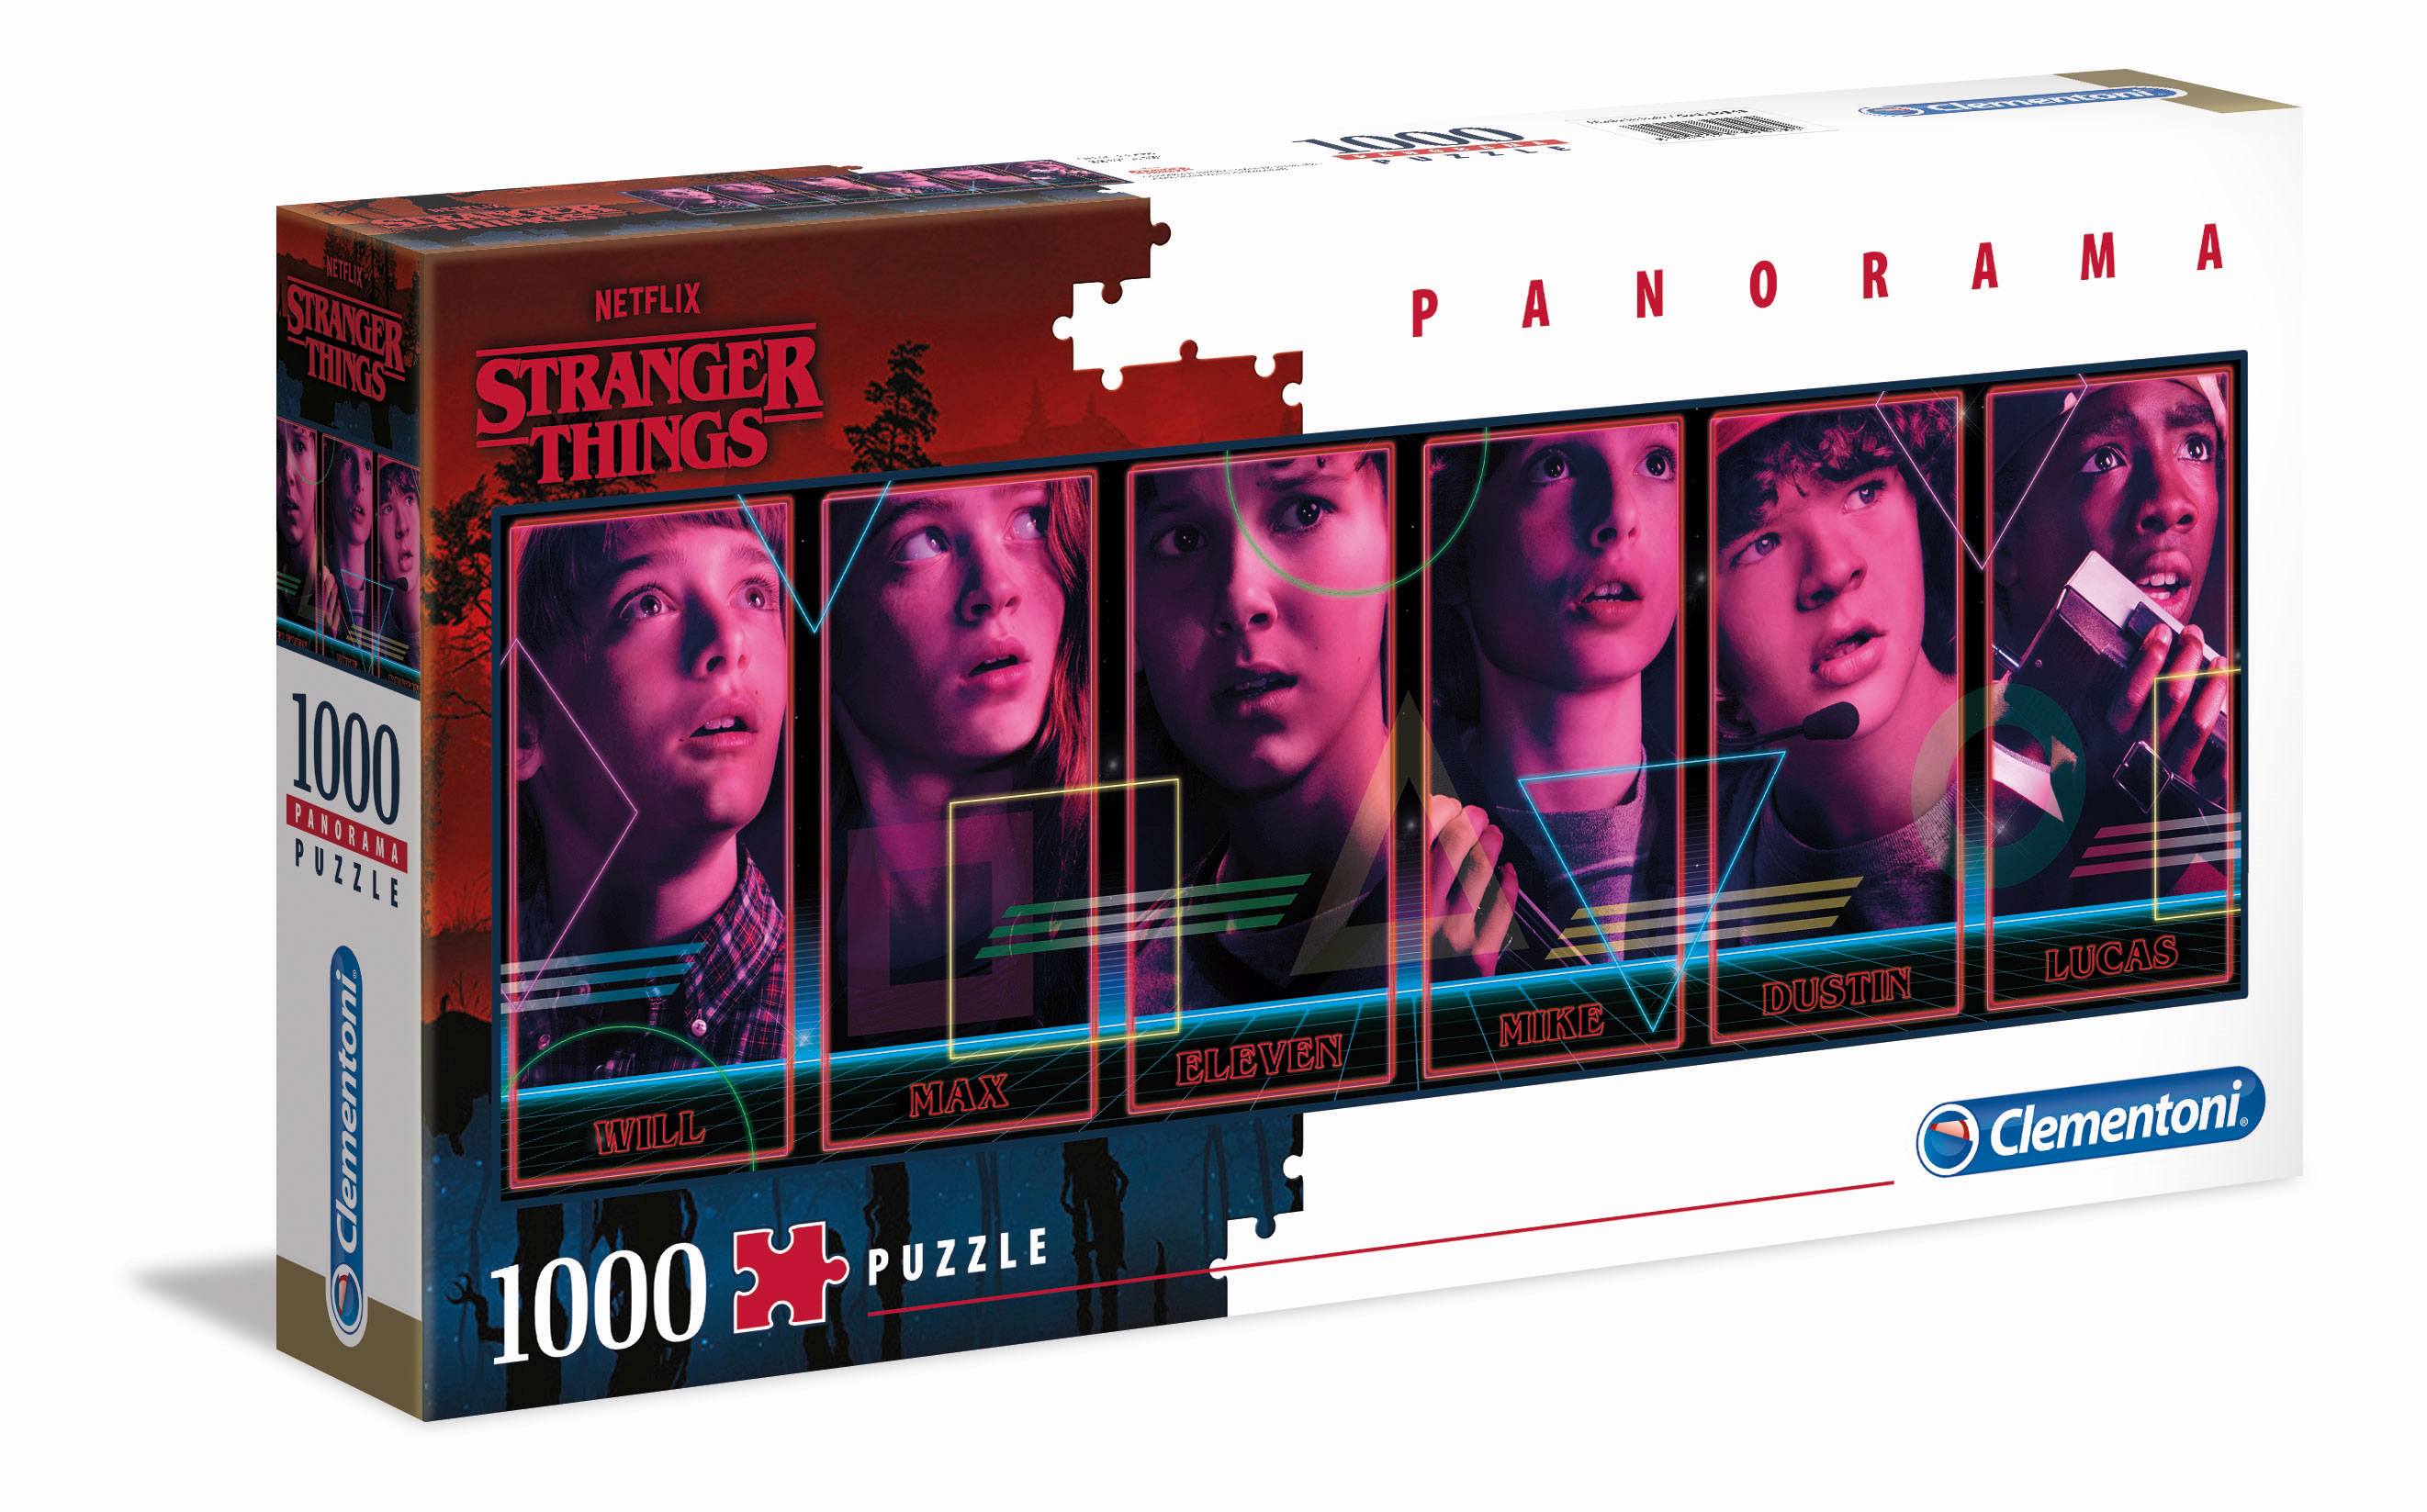 Puzzle 1000 Peças Stranger Things Characters Panorama 